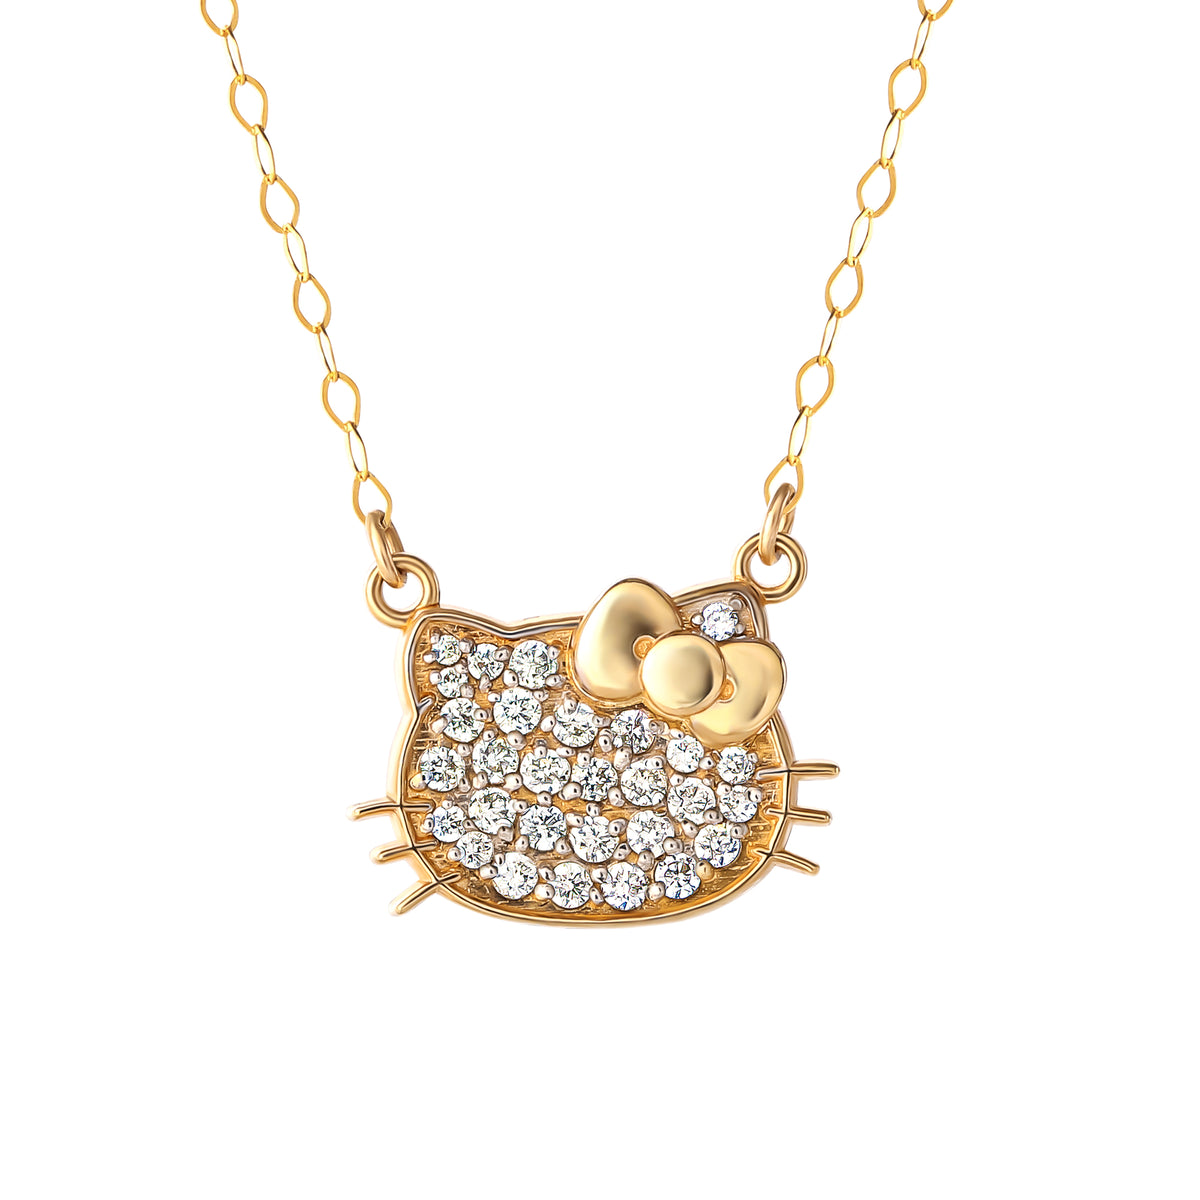 Hello Kitty Pendant Necklace in Rose Gold Embellished with Swarovski  Crystals | Catch.com.au